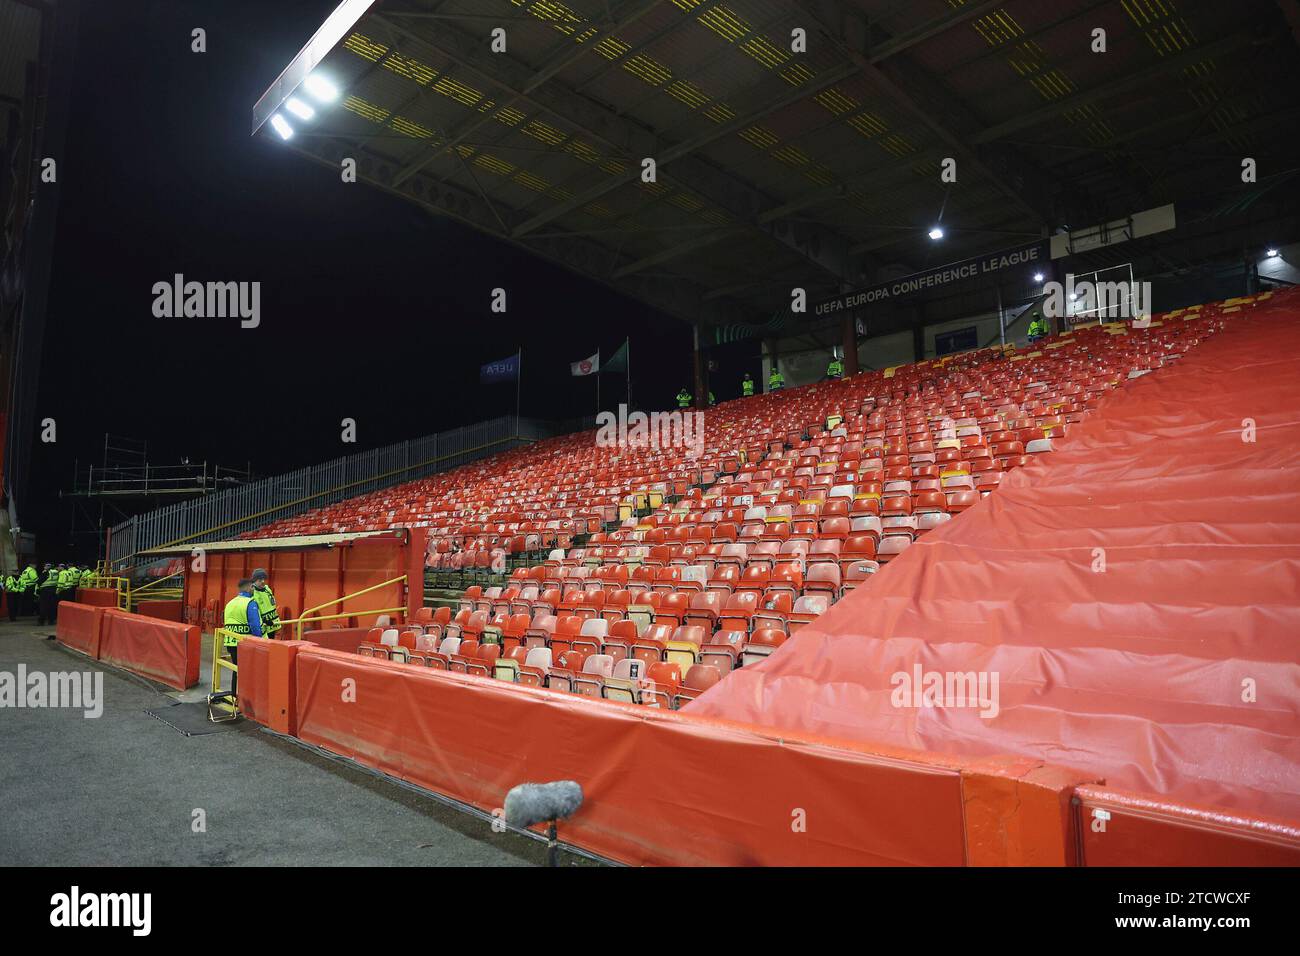 14.12.2023, Fussball UEFA Europa Conference League, Aberdeen FC - Eintracht Frankfurt, emonline, emspor, v.l., Leerer Gästeblock im Pittodrie Stadium in Aberdeen DFL/DFB REGULATIONS PROHIBIT ANY USE OF PHOTOGRAPHS AS IMAGE SEQUENCES AND/OR QUASI-VIDEO. xdcx Credit: dpa picture alliance/Alamy Live News Stock Photo